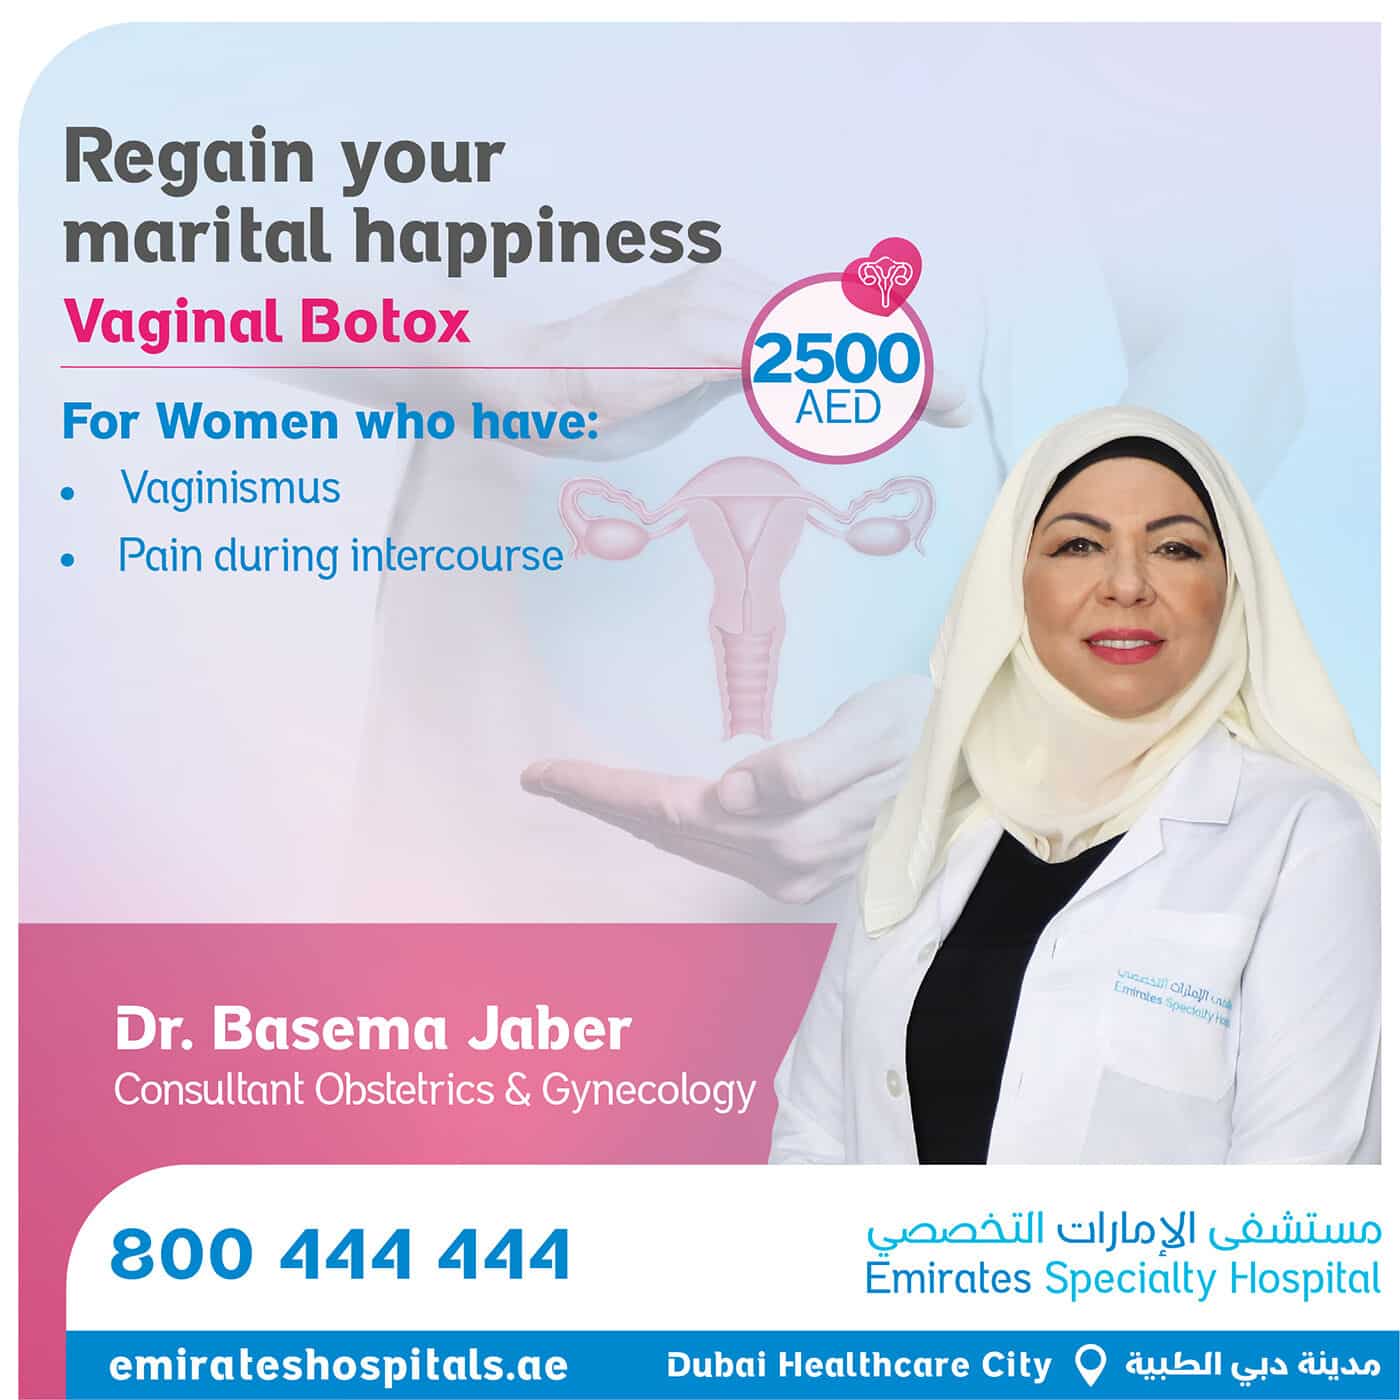 Regain your Marital Happiness Offer , Emirates Specialty Hospital DHCC